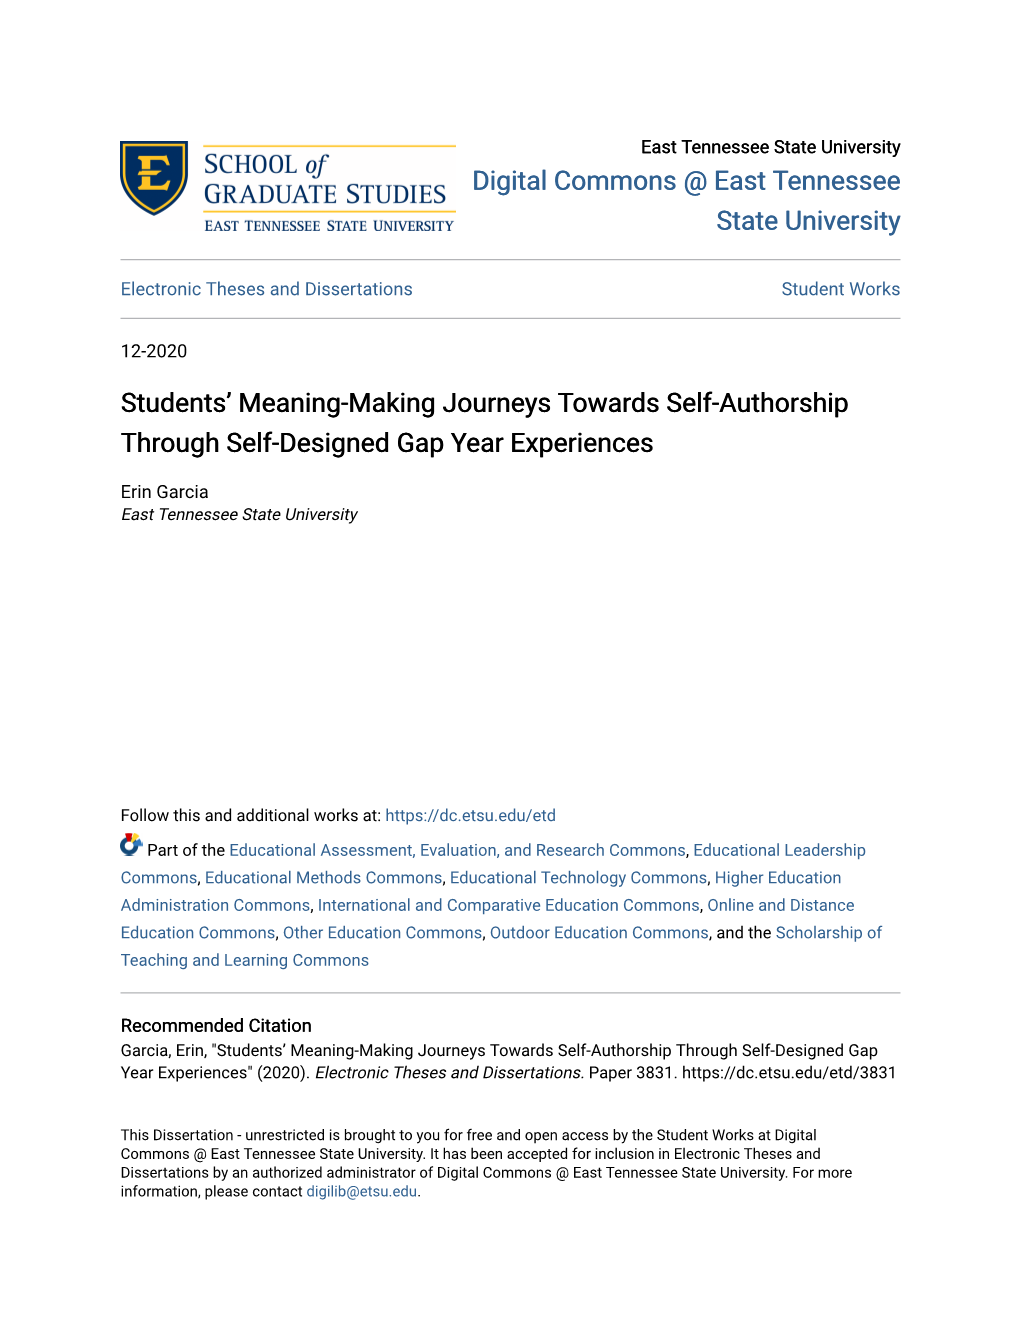 Students' Meaning-Making Journeys Towards Self-Authorship Through